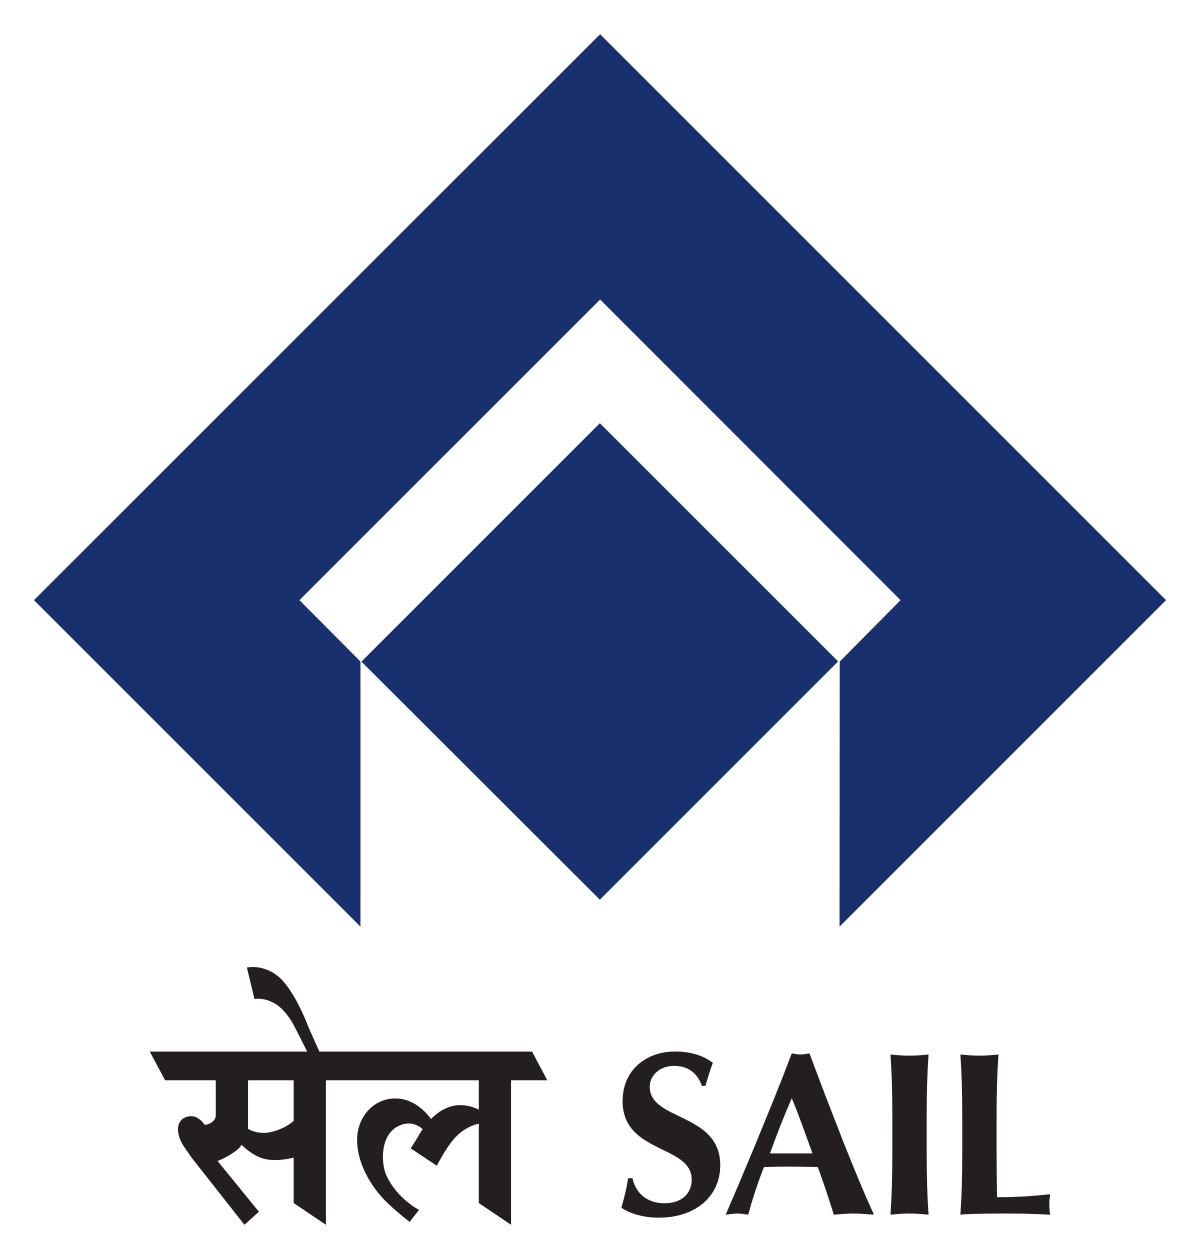 SAIL earns net profit of Rs 3850 crore in FY21